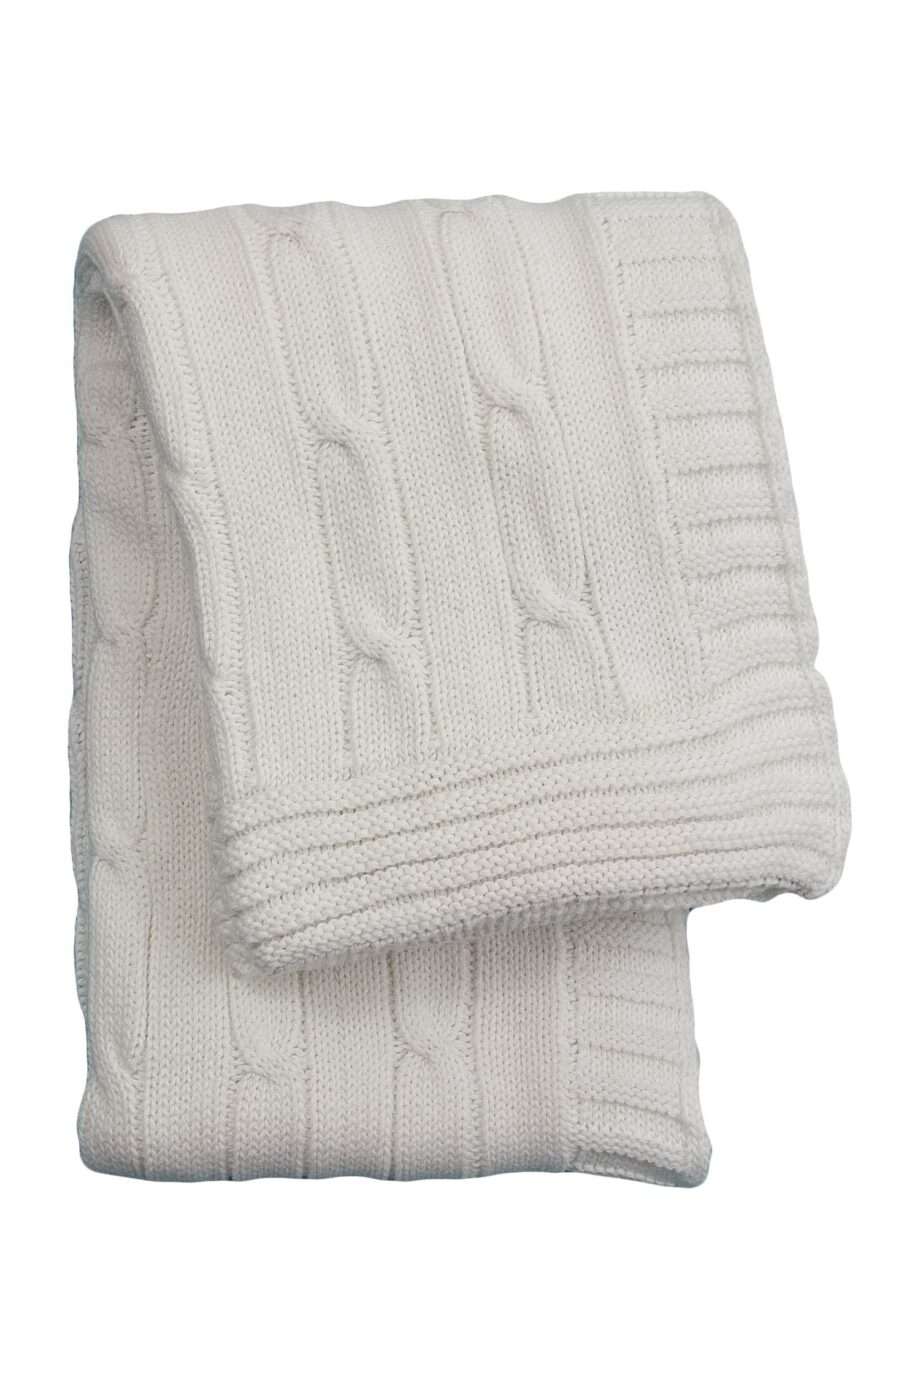 twist white knitted cotton little blanket small